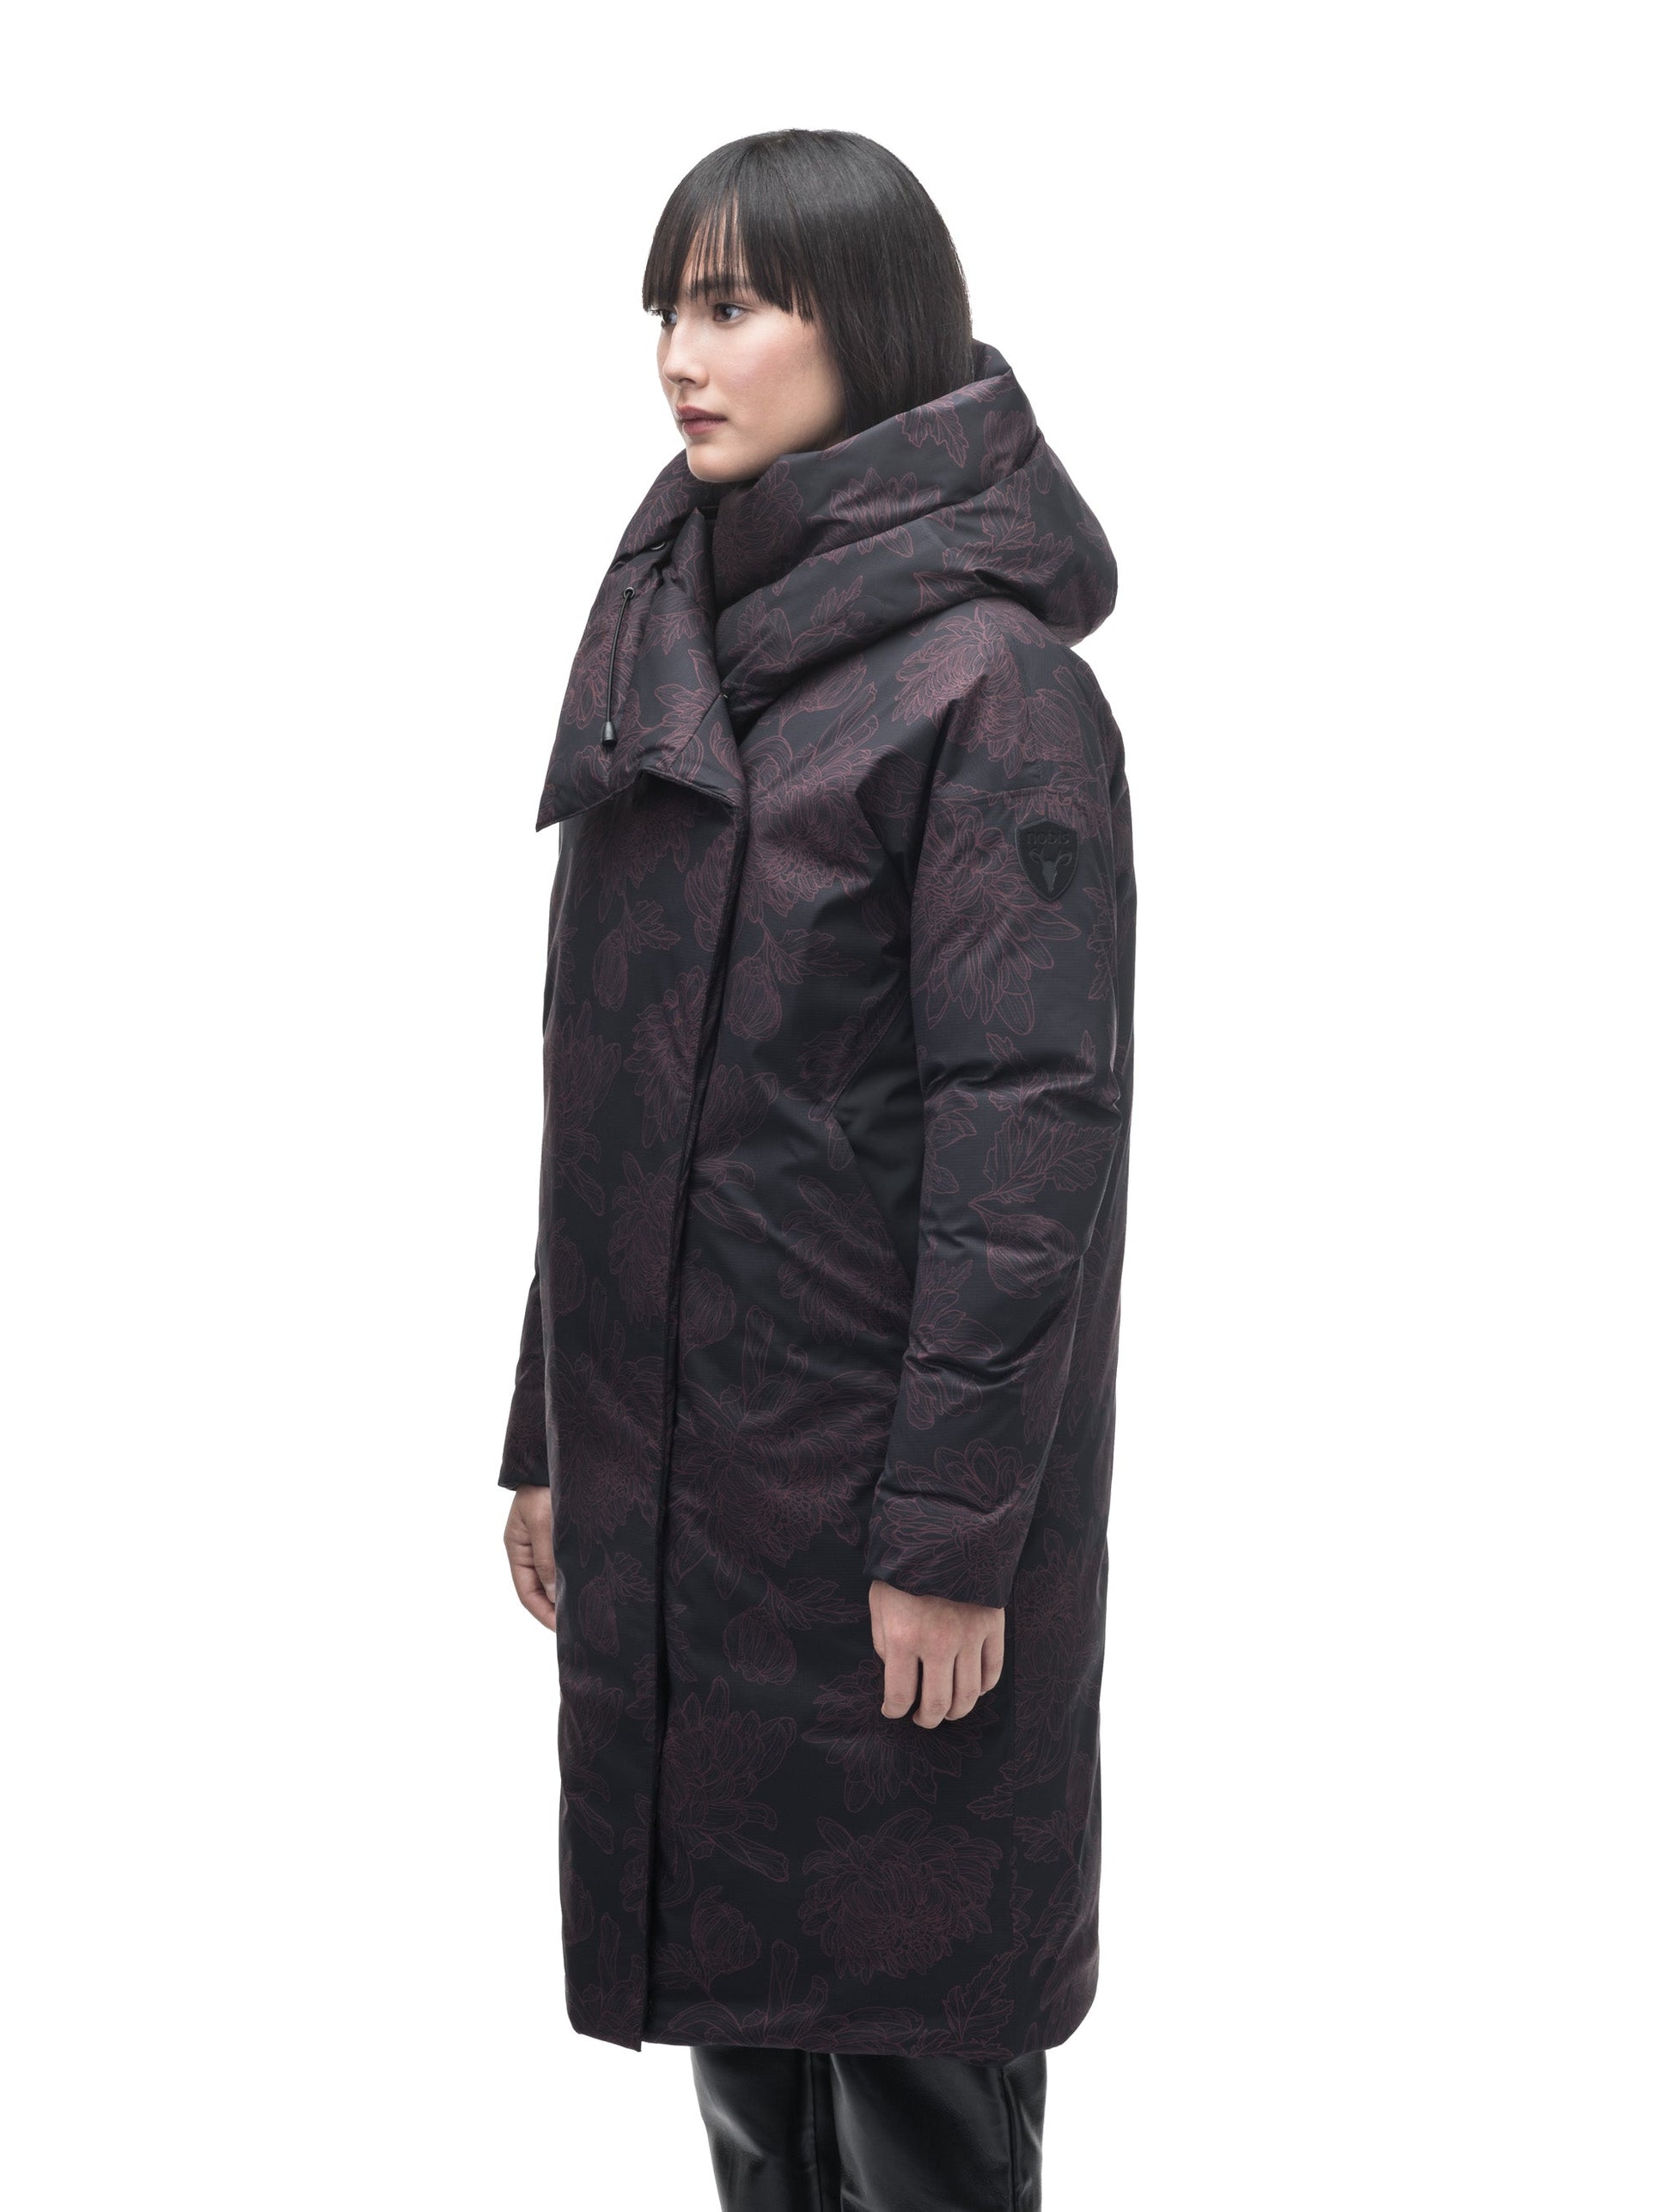 Axis Ladies Oversized Coat in knee length, Canadian duck down insulation, and two-way front zipper, in Dark Floral